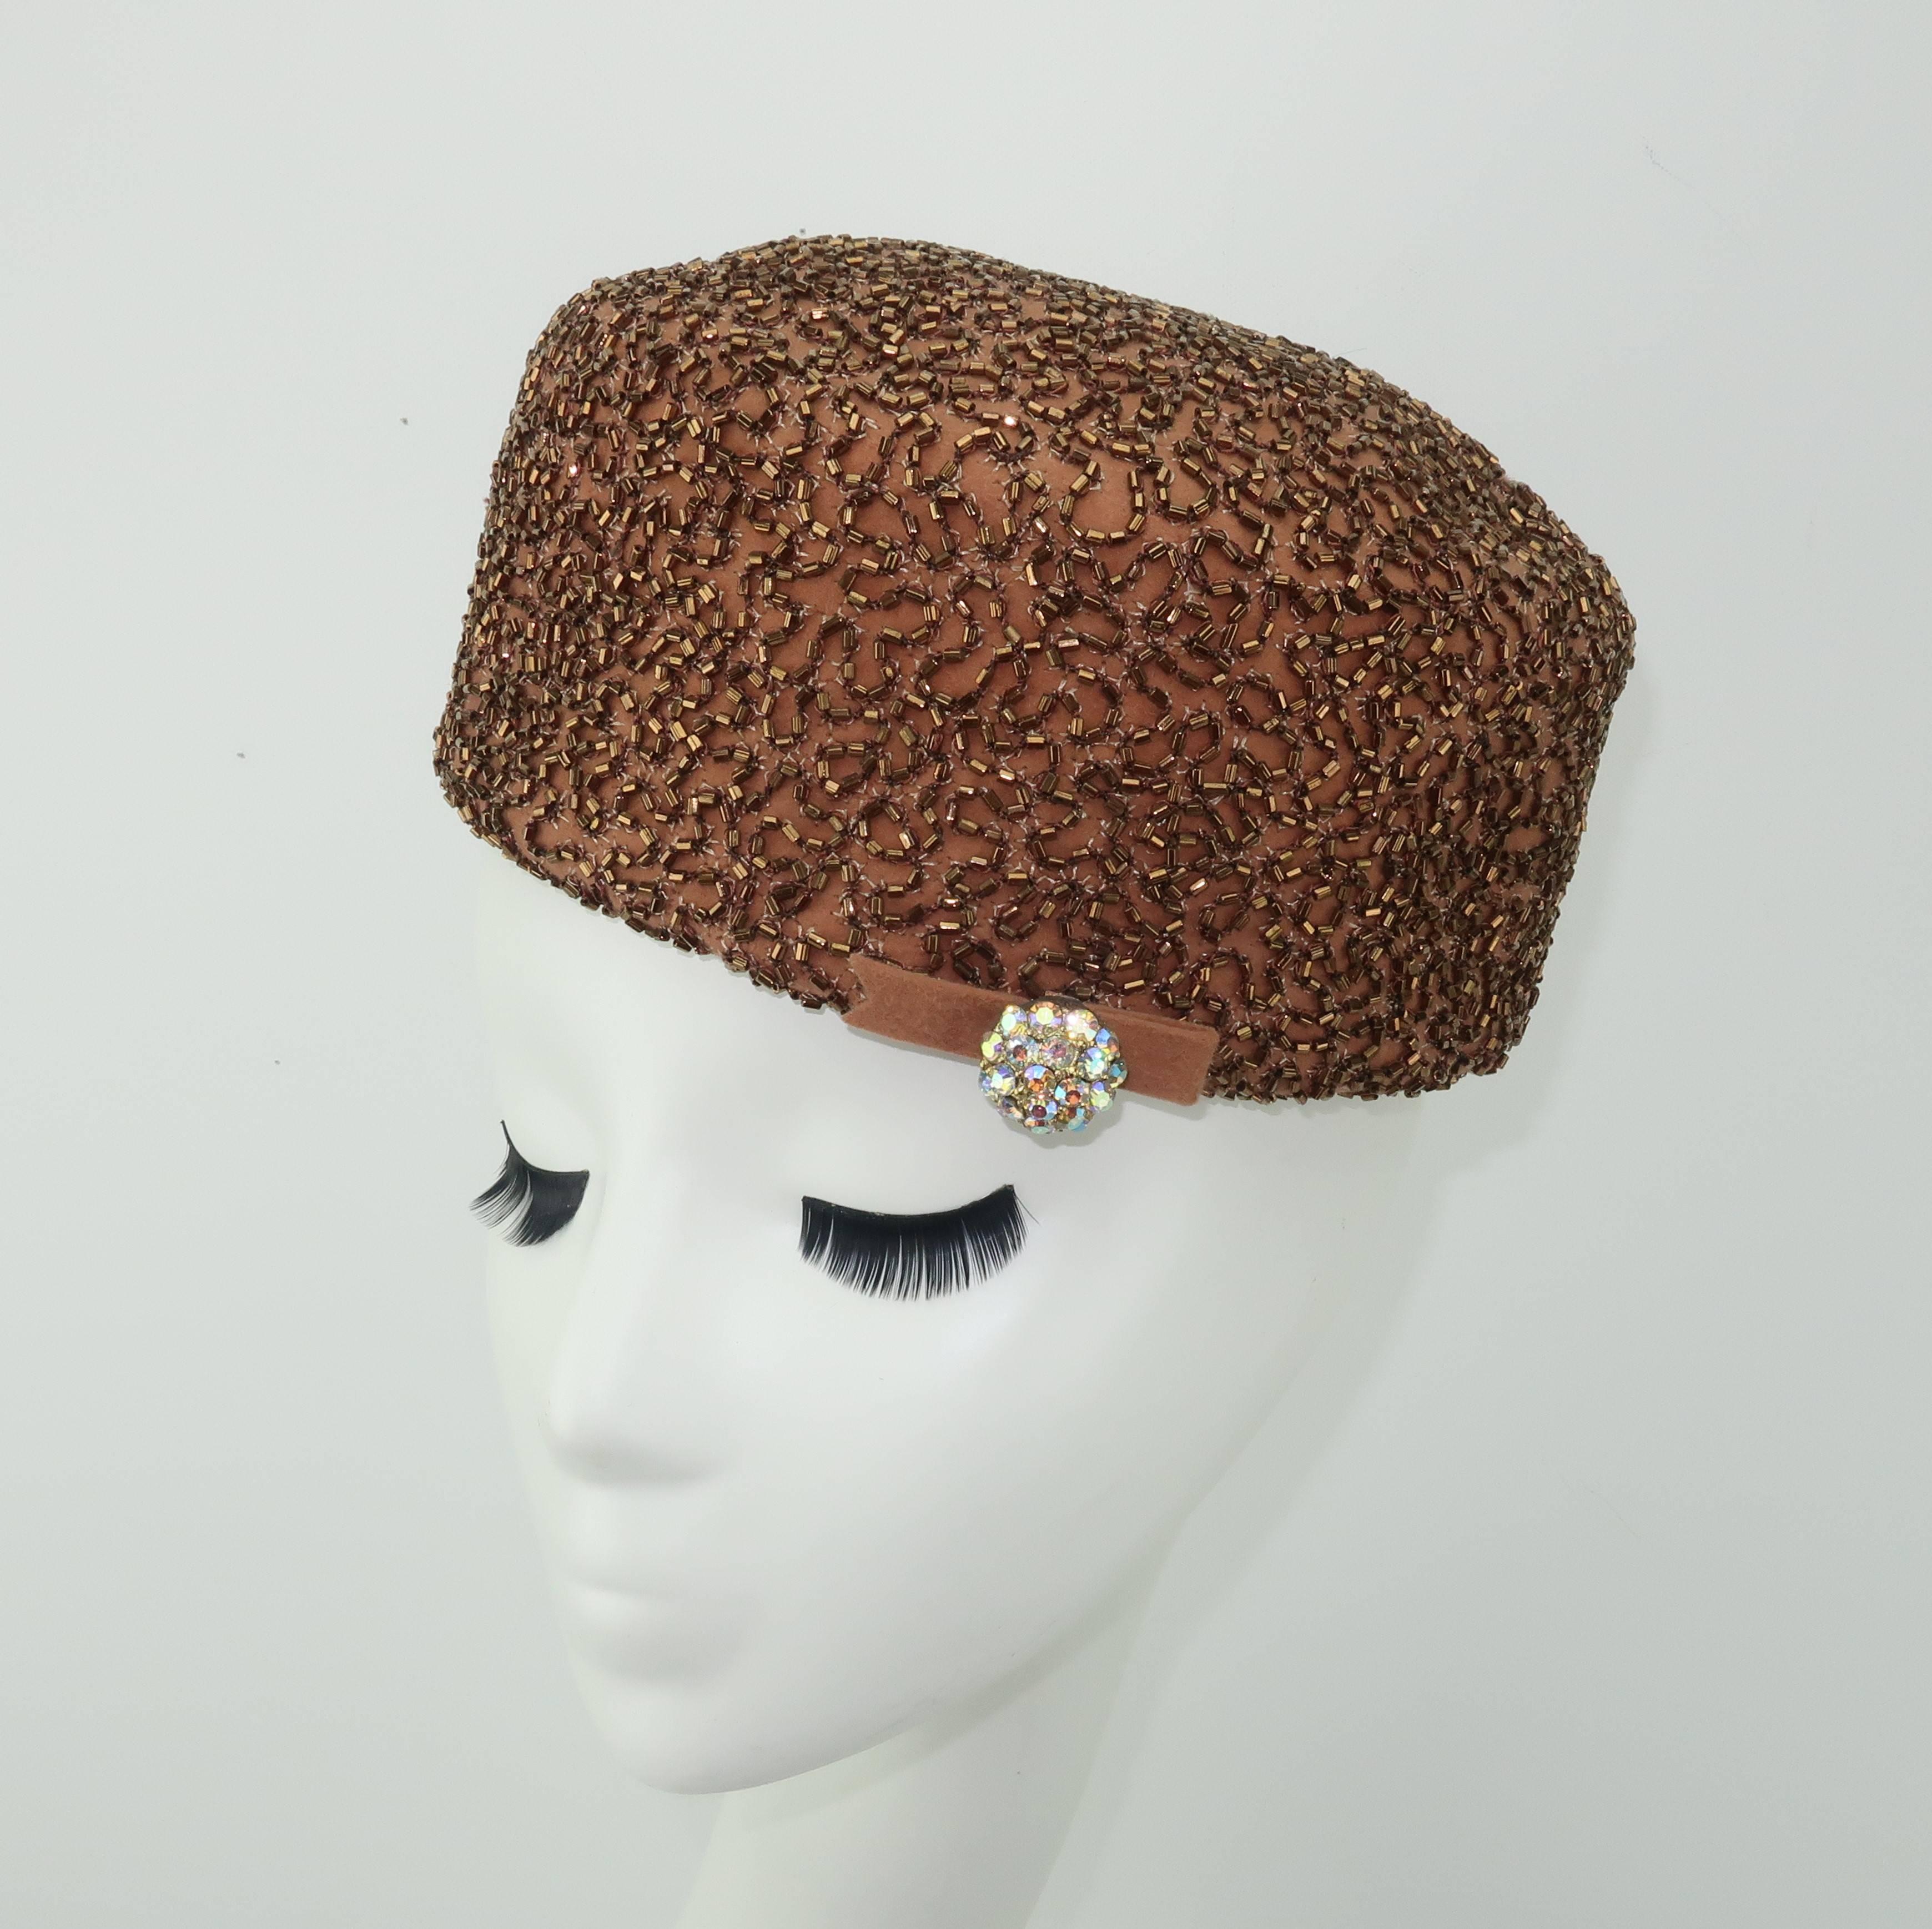 A glamorous topper from the California based millinery firm, Leslie James, is a fun way to add a vintage accessory to a modern day ensemble.  This beautifully made brown felt wool pillbox hat is embellished with copper bugle beads in a vermiculated